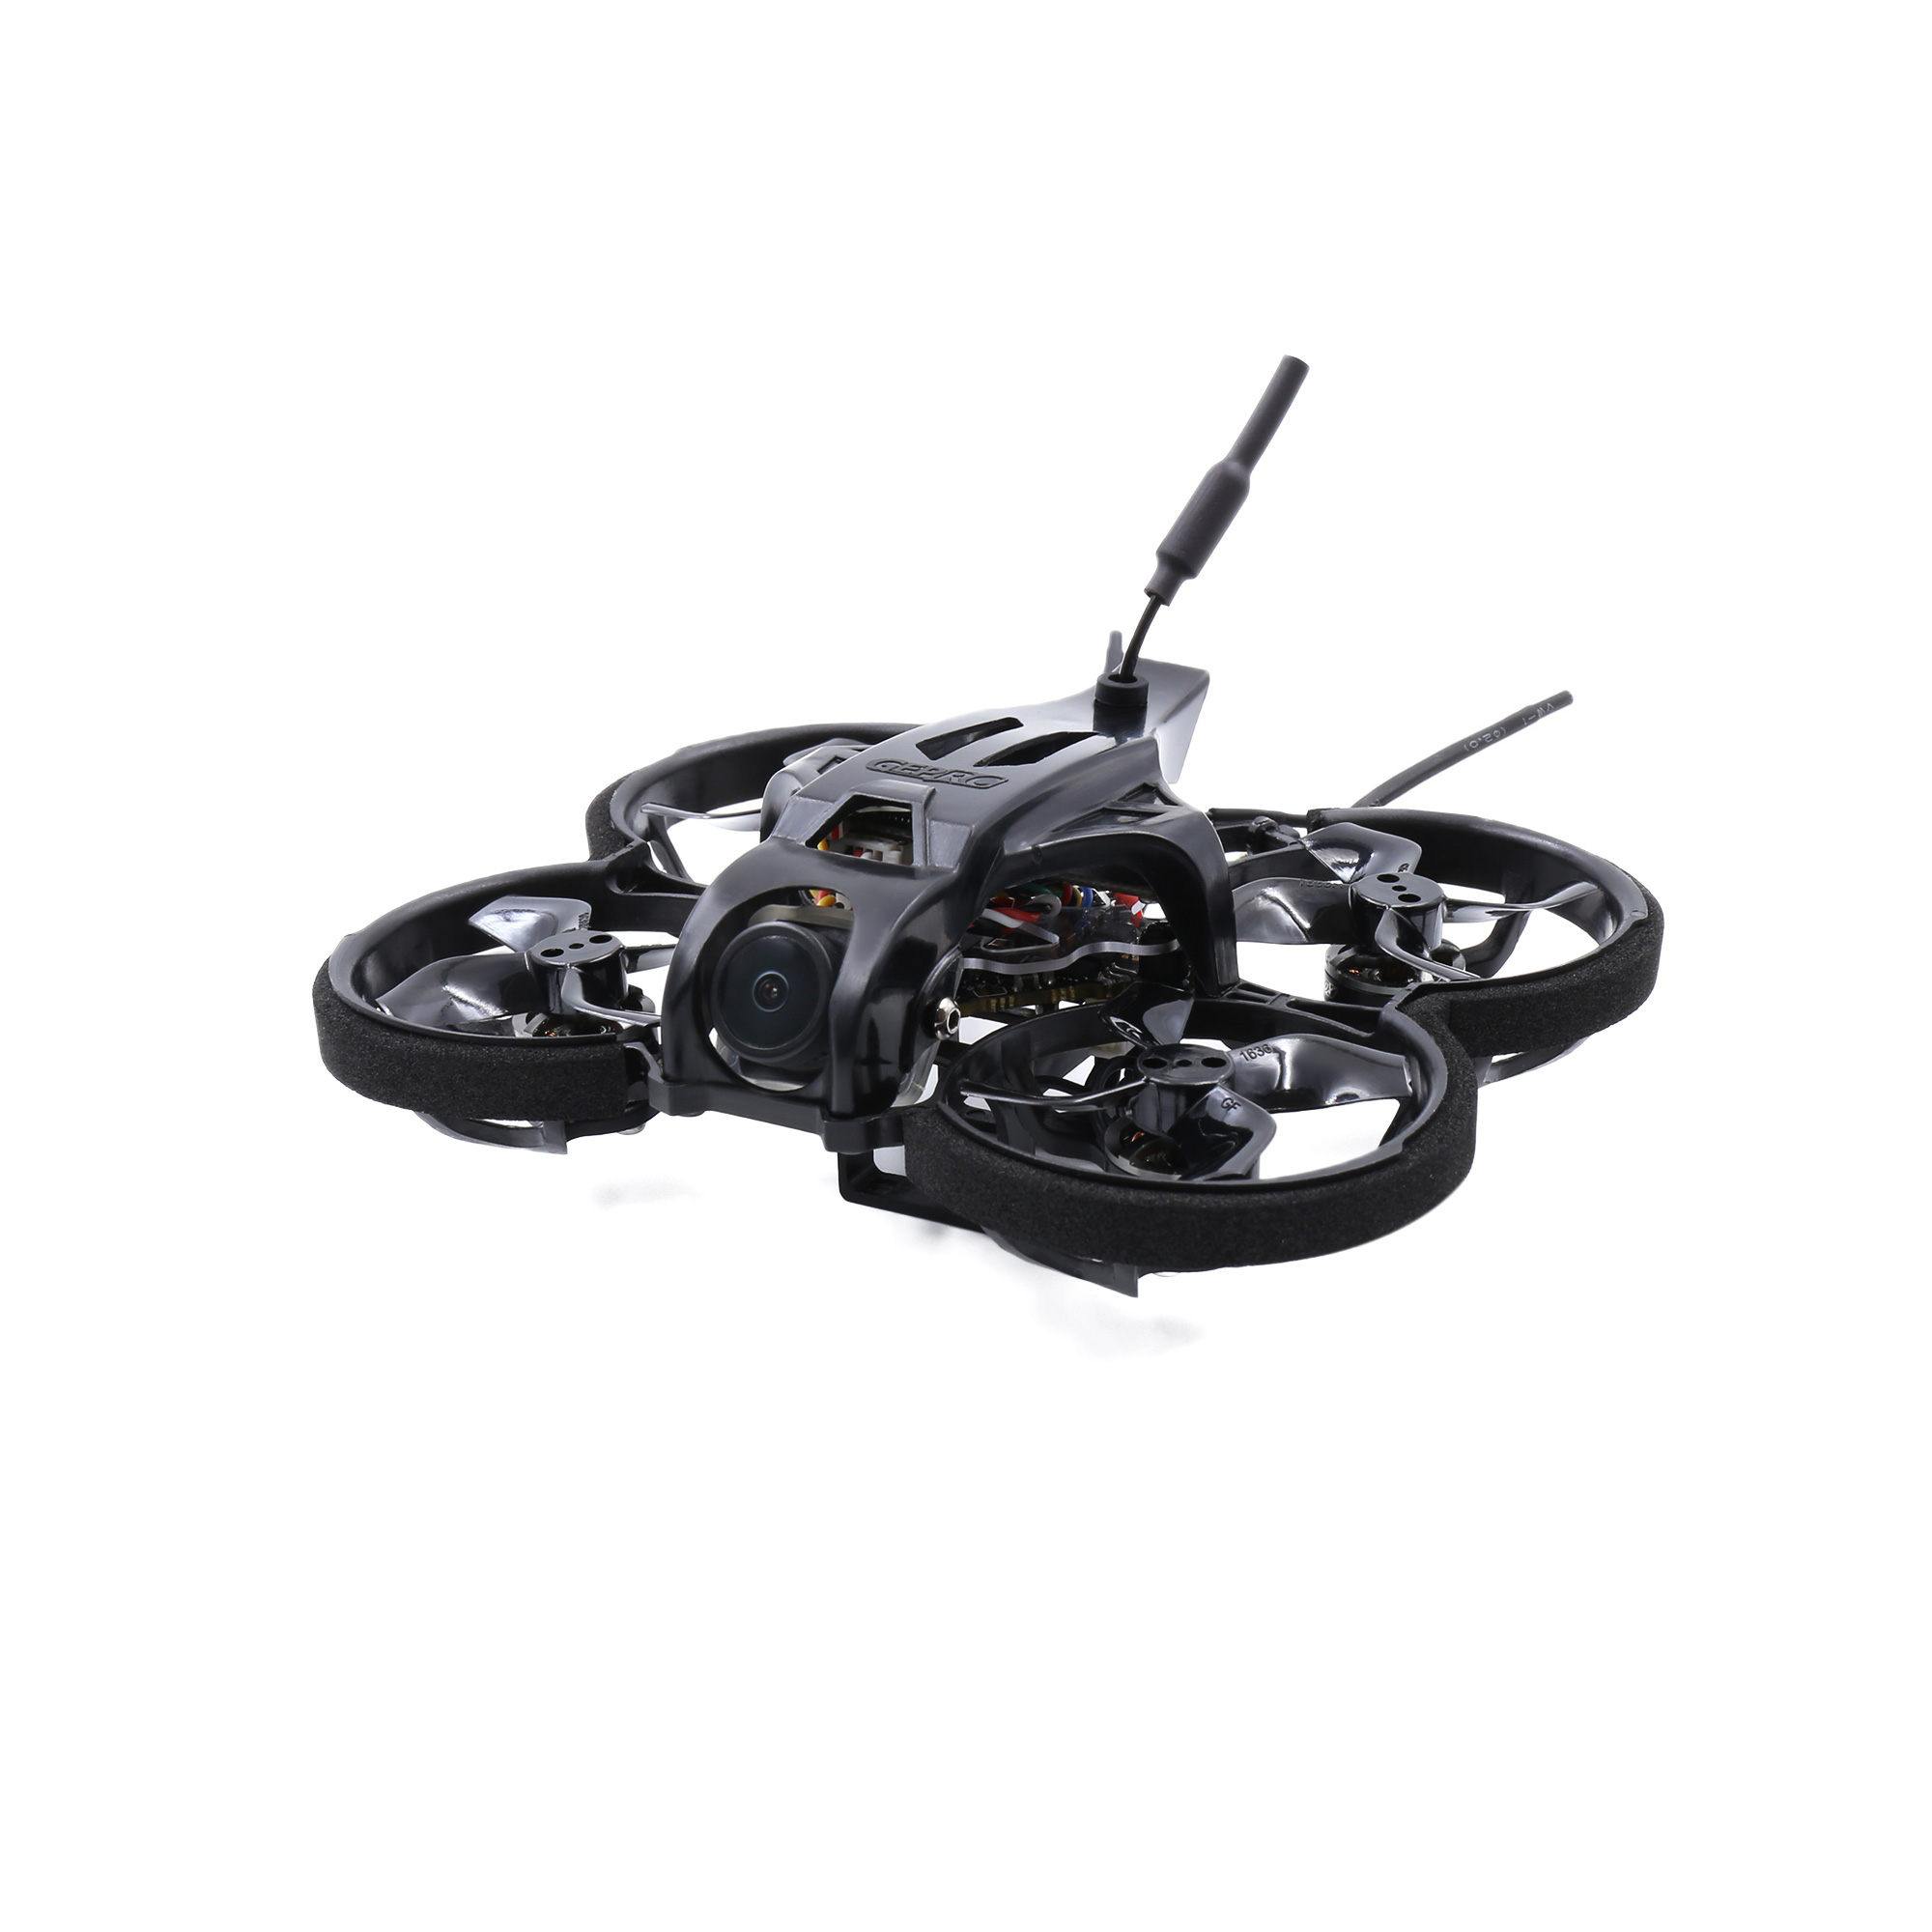 GEPRC TinyGO 1.6inch 2S FPV Indoor Whoop Runcam Nano2 +GR8 Remote Controller+RG1 Goggles RTF Ready To Fly FPV Racing RC Drone 3